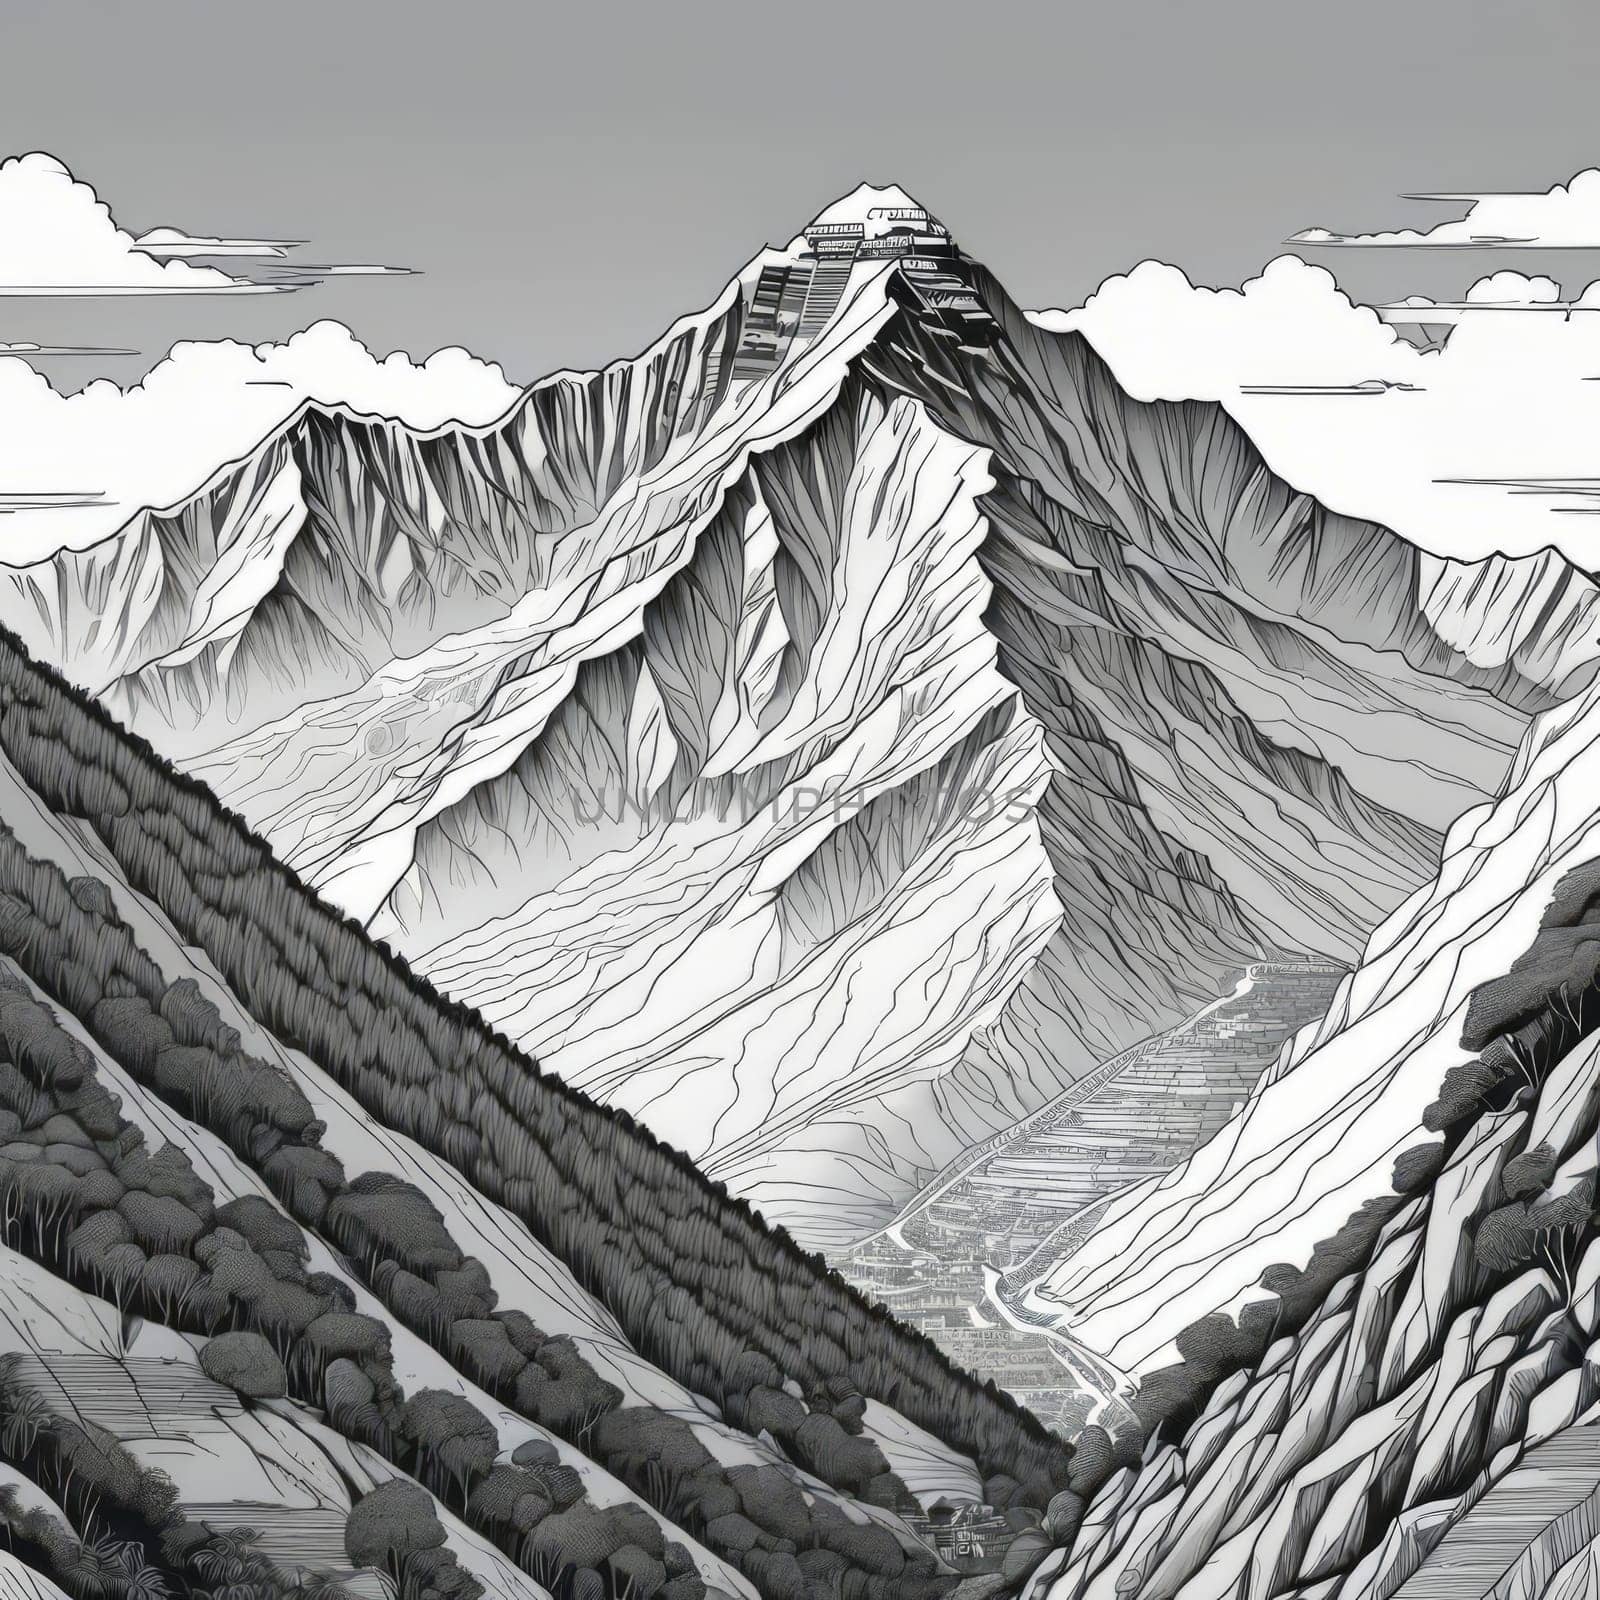 Serene black, white painting capturing majestic Nepal mountains, lush trees in harmonious contrast. Logo design for outdoor adventure travel agency, nature themed website, social media banner, print. by Angelsmoon